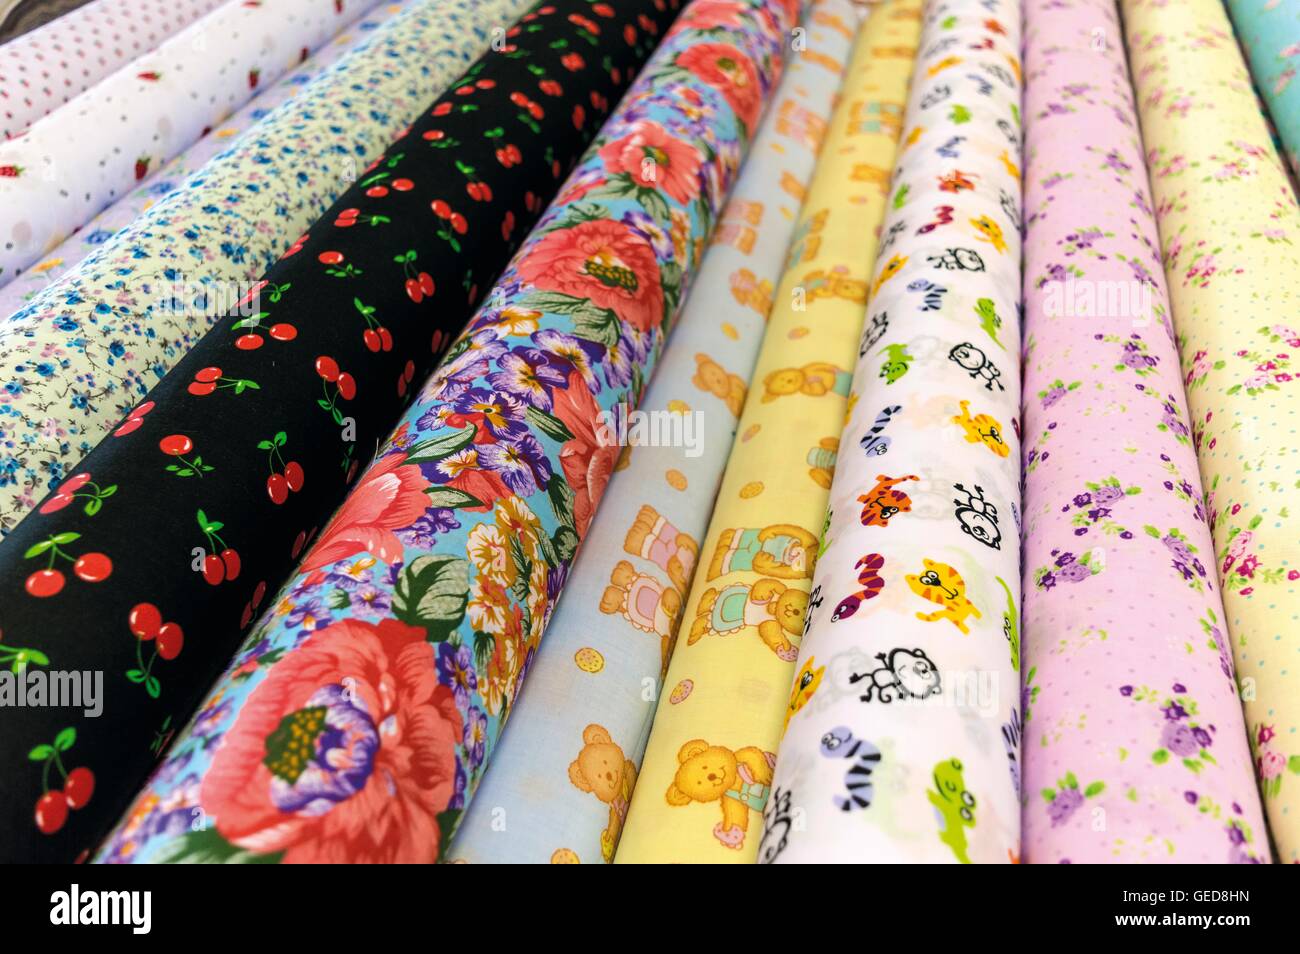 Cloth in a Haberdashery Stock Photo